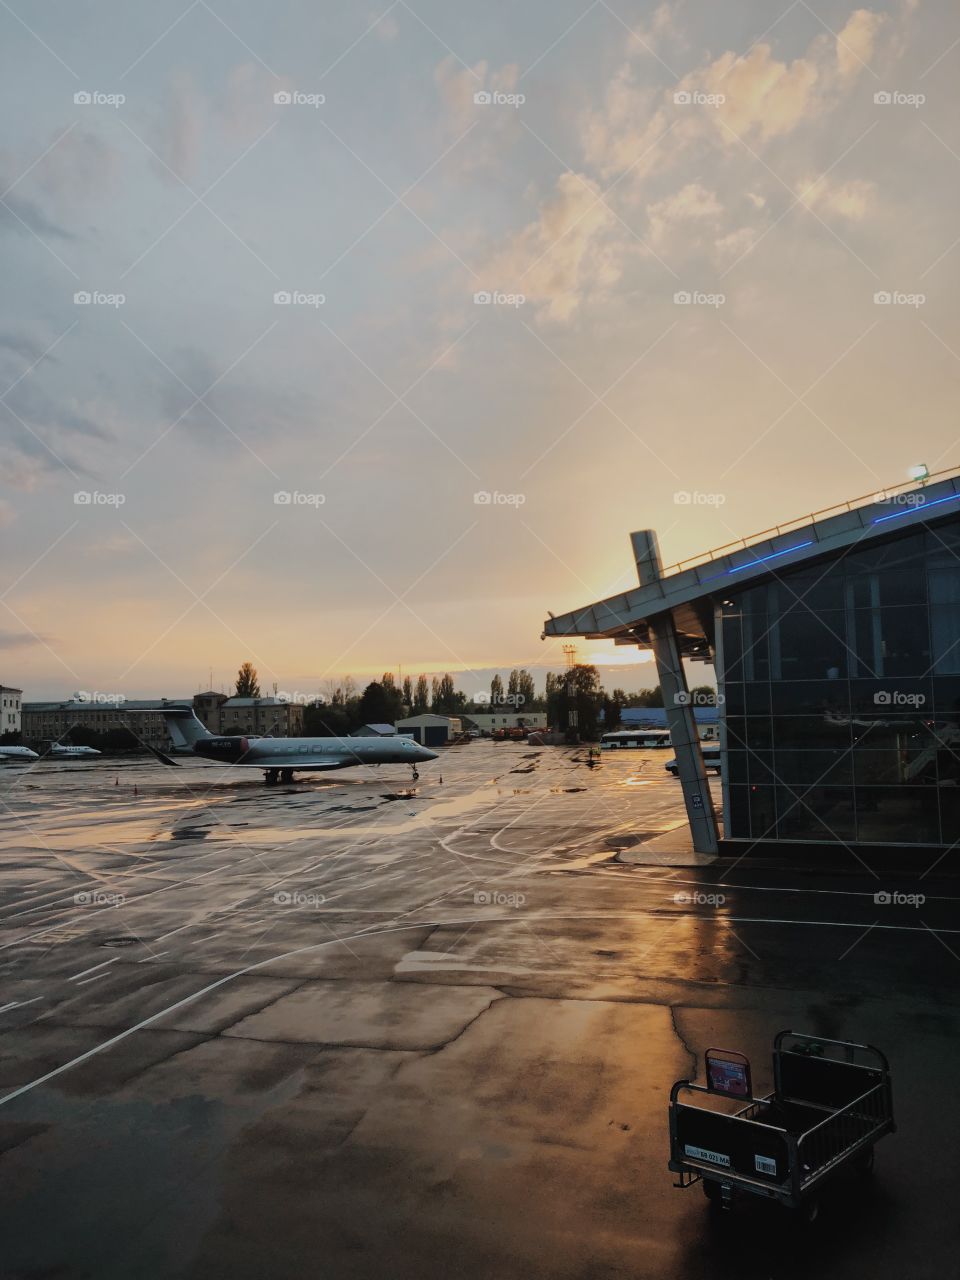 Sunset at the airport 